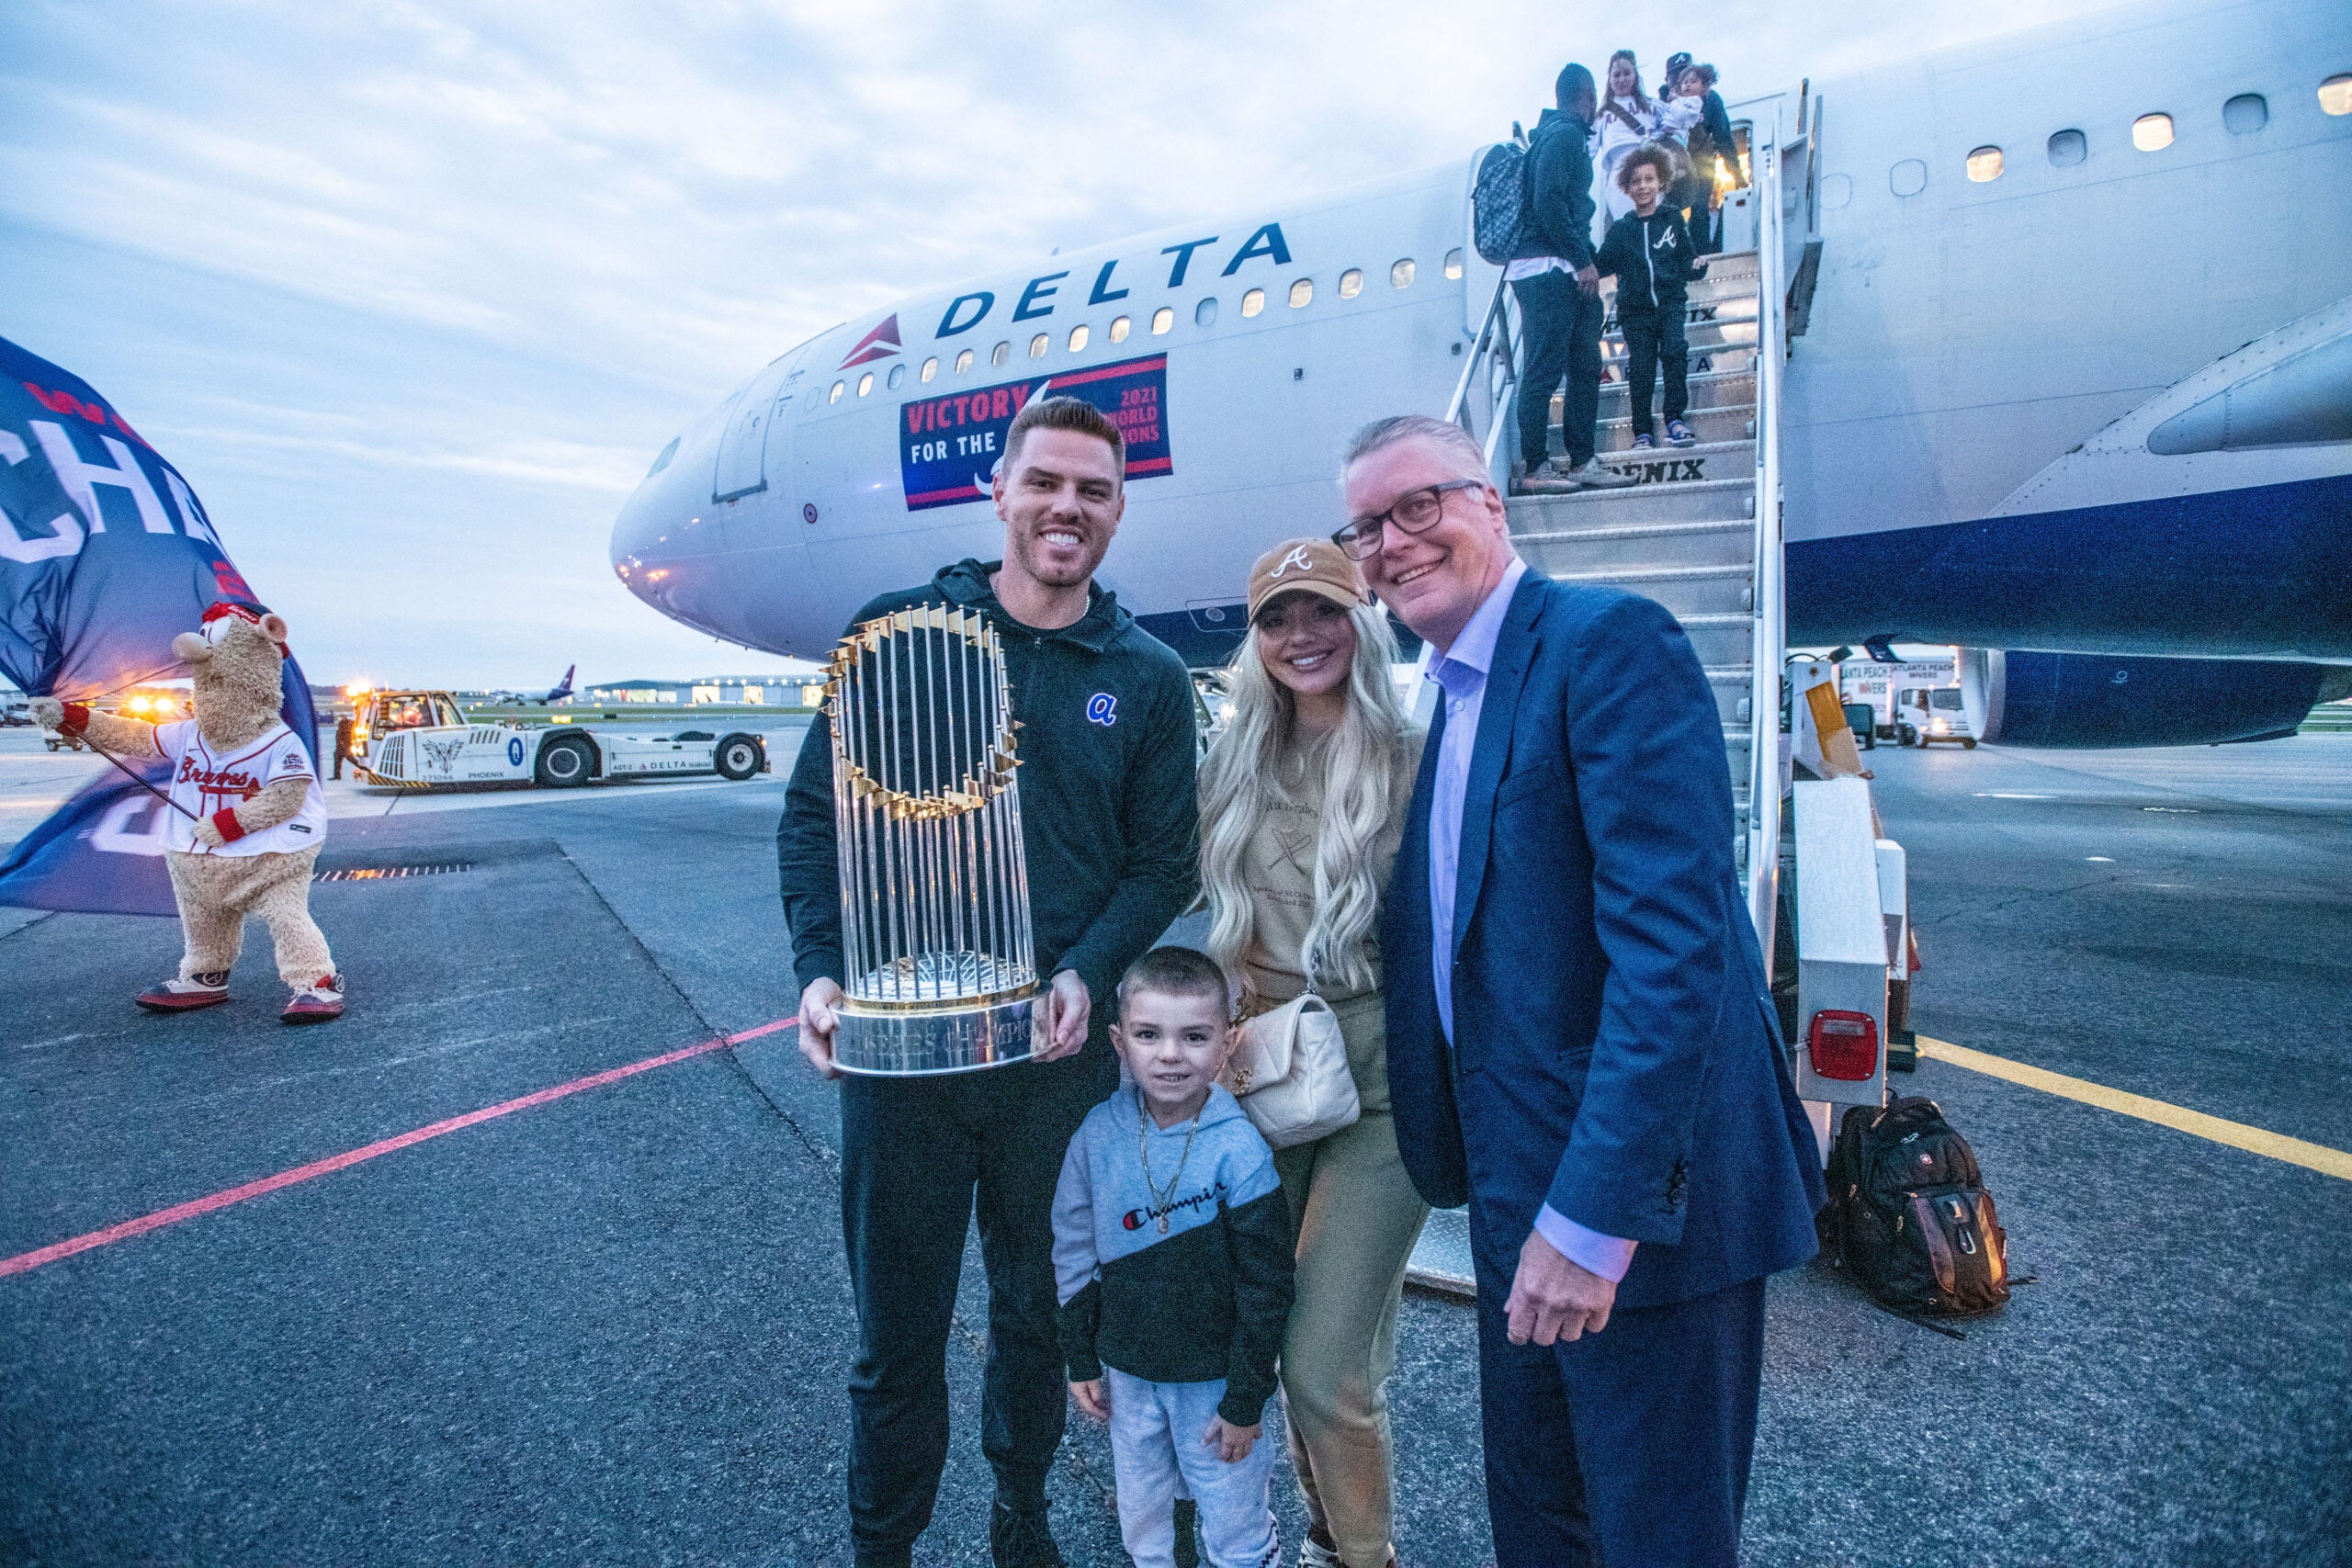 Atlanta Braves boost Delta's latest claim: 'The grand slam of carrying champions'